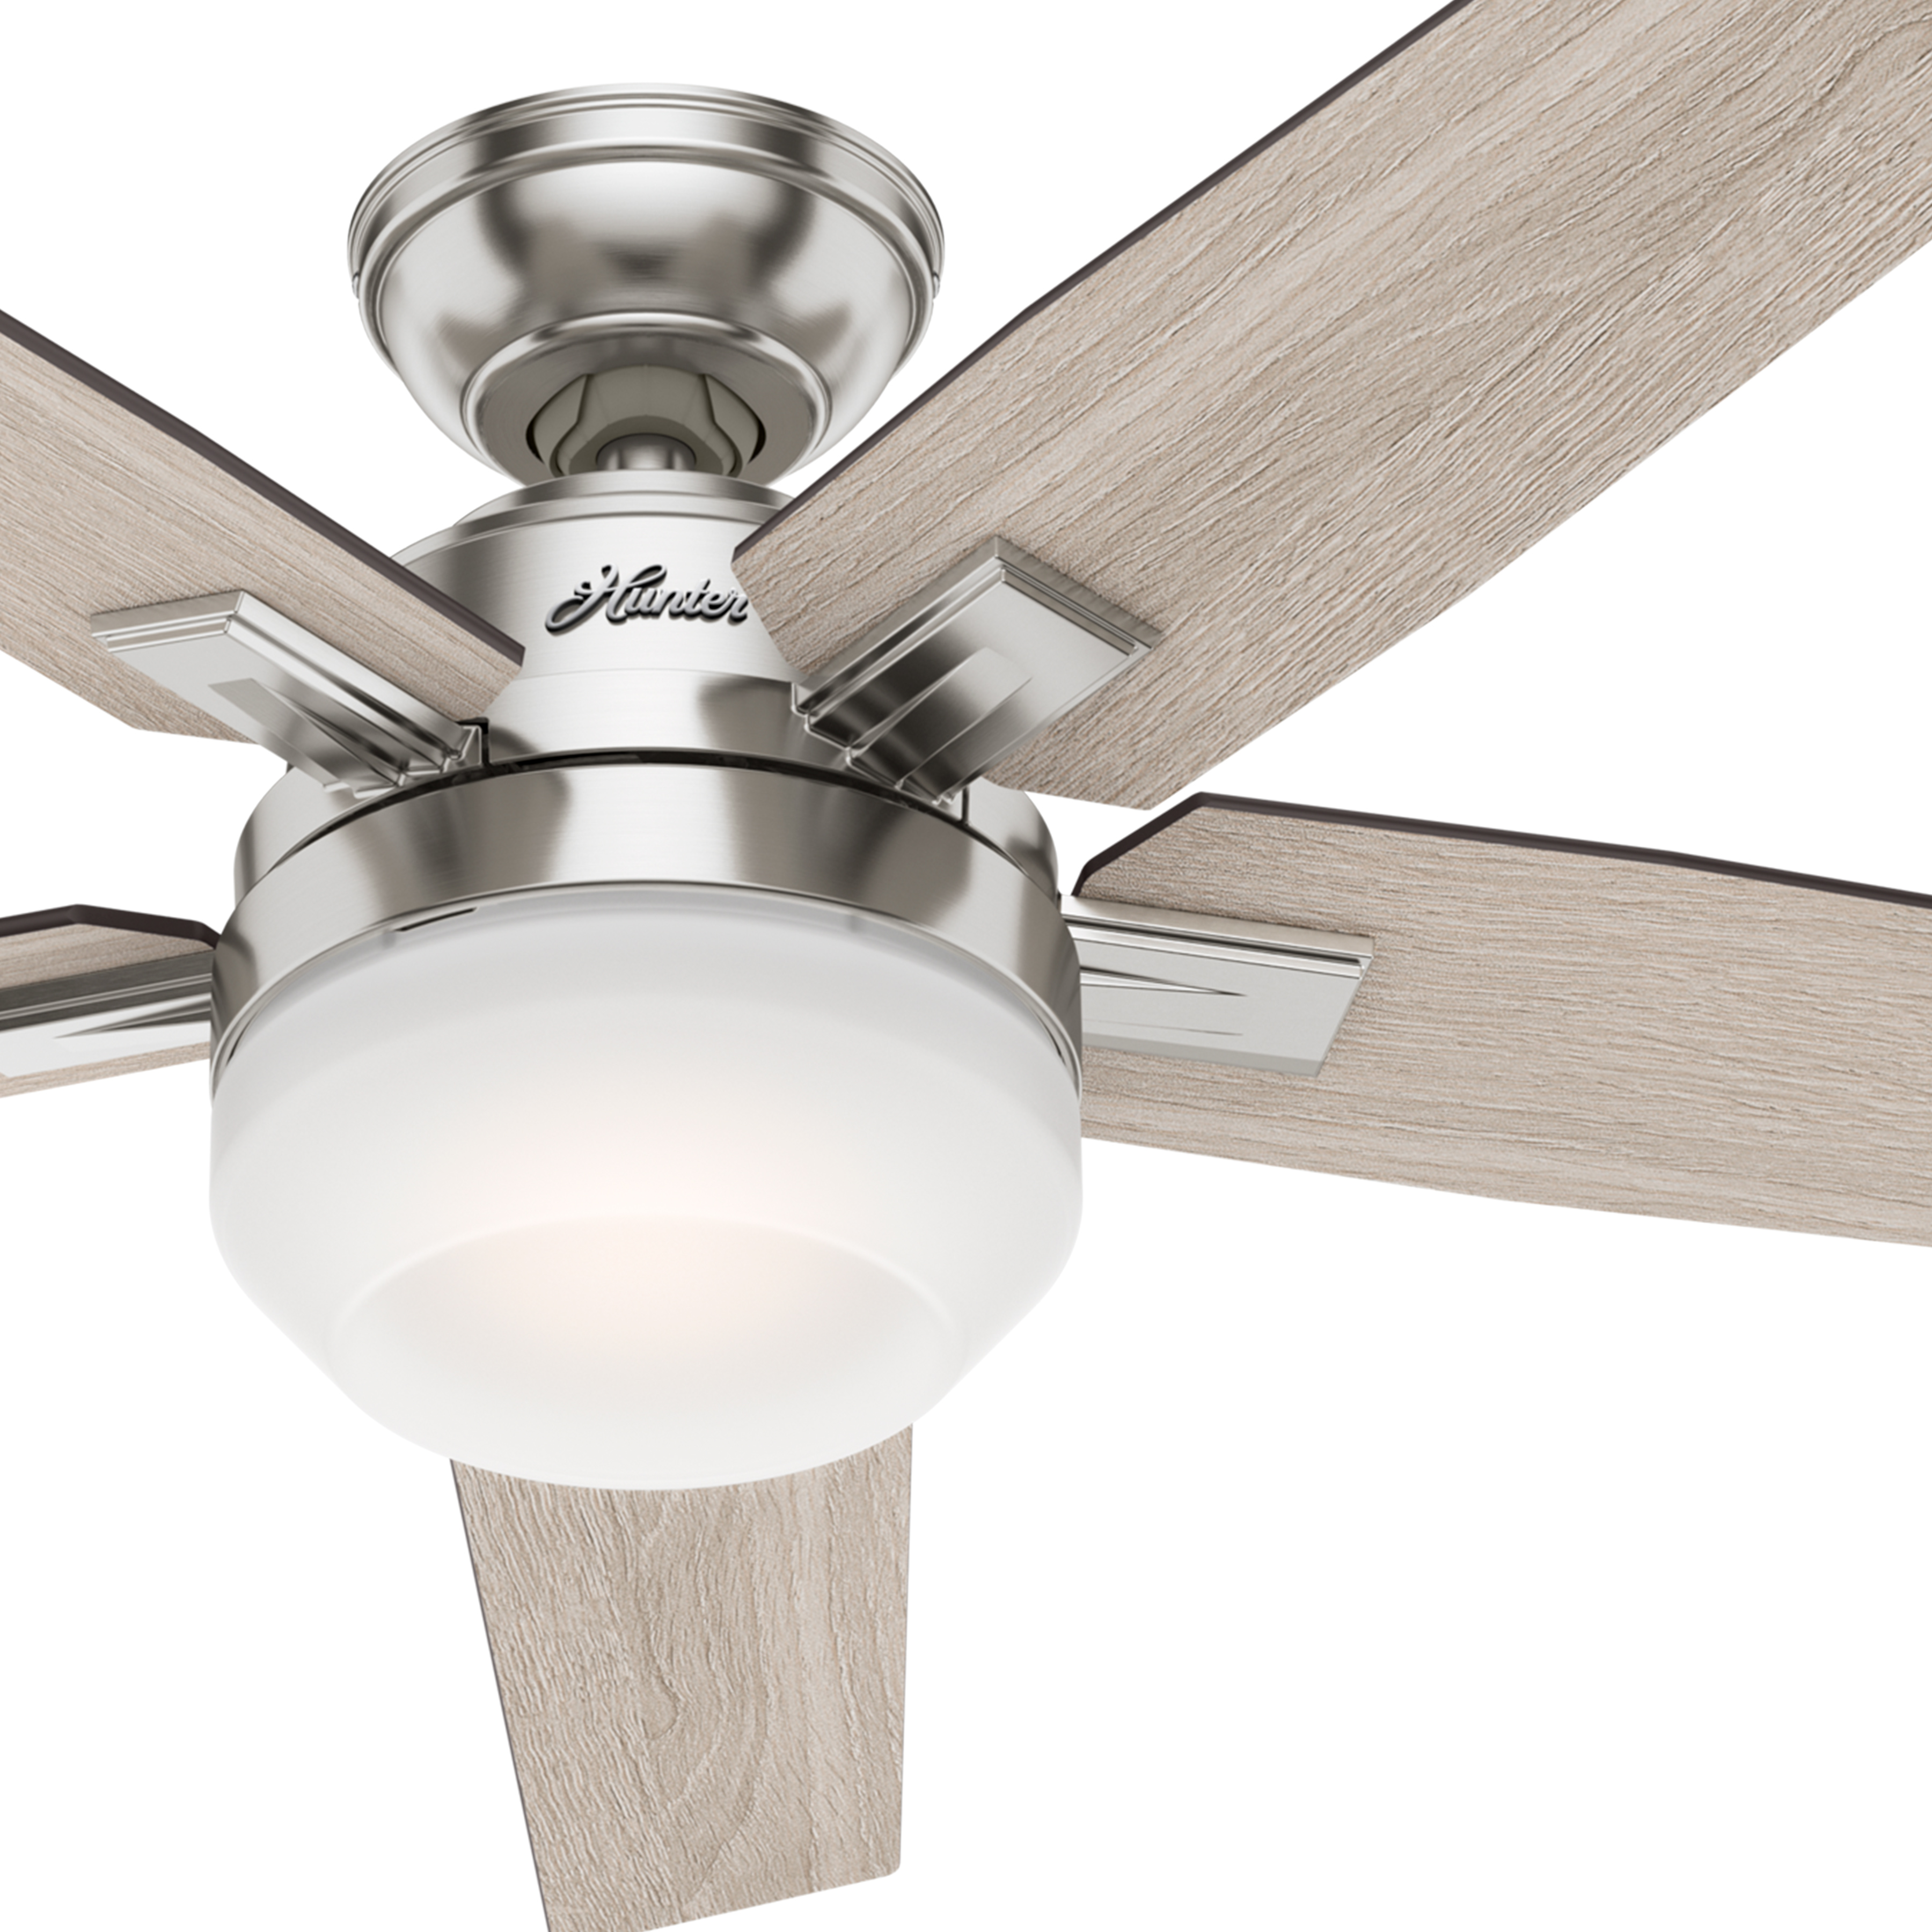 Hunter 52" Modern Brushed Nickel Ceiling Fan with LED Light and Remote Control 